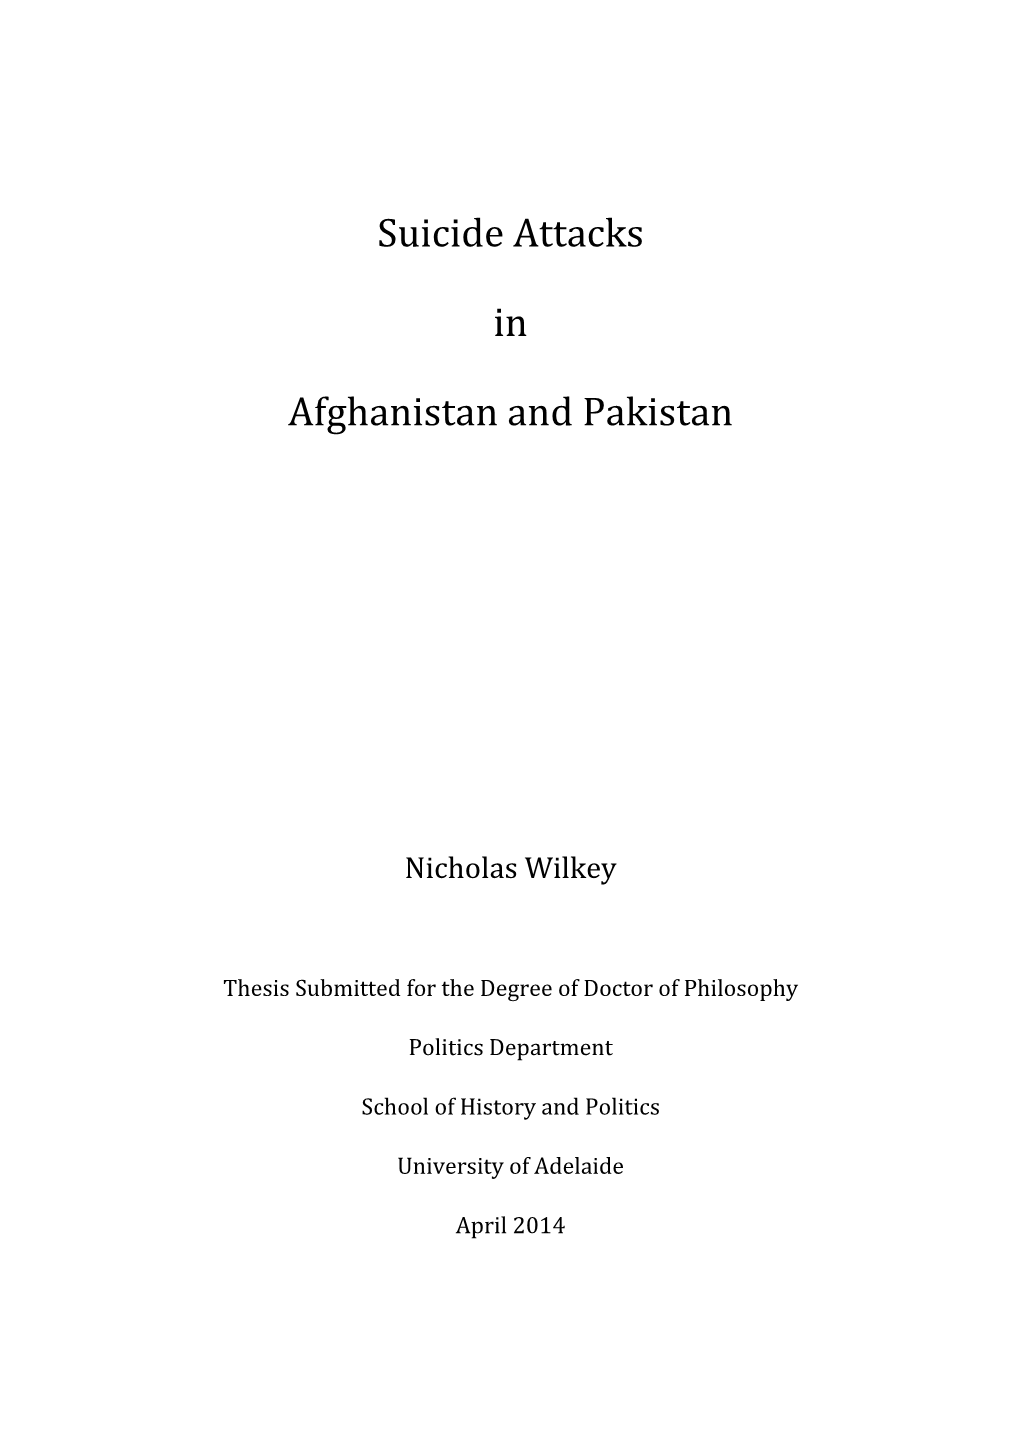 Suicide Attacks in Afghanistan and Pakistan Are Some of the Largest on Record, Surpassing, for Instance, Those in Palestine and Sri Lanka